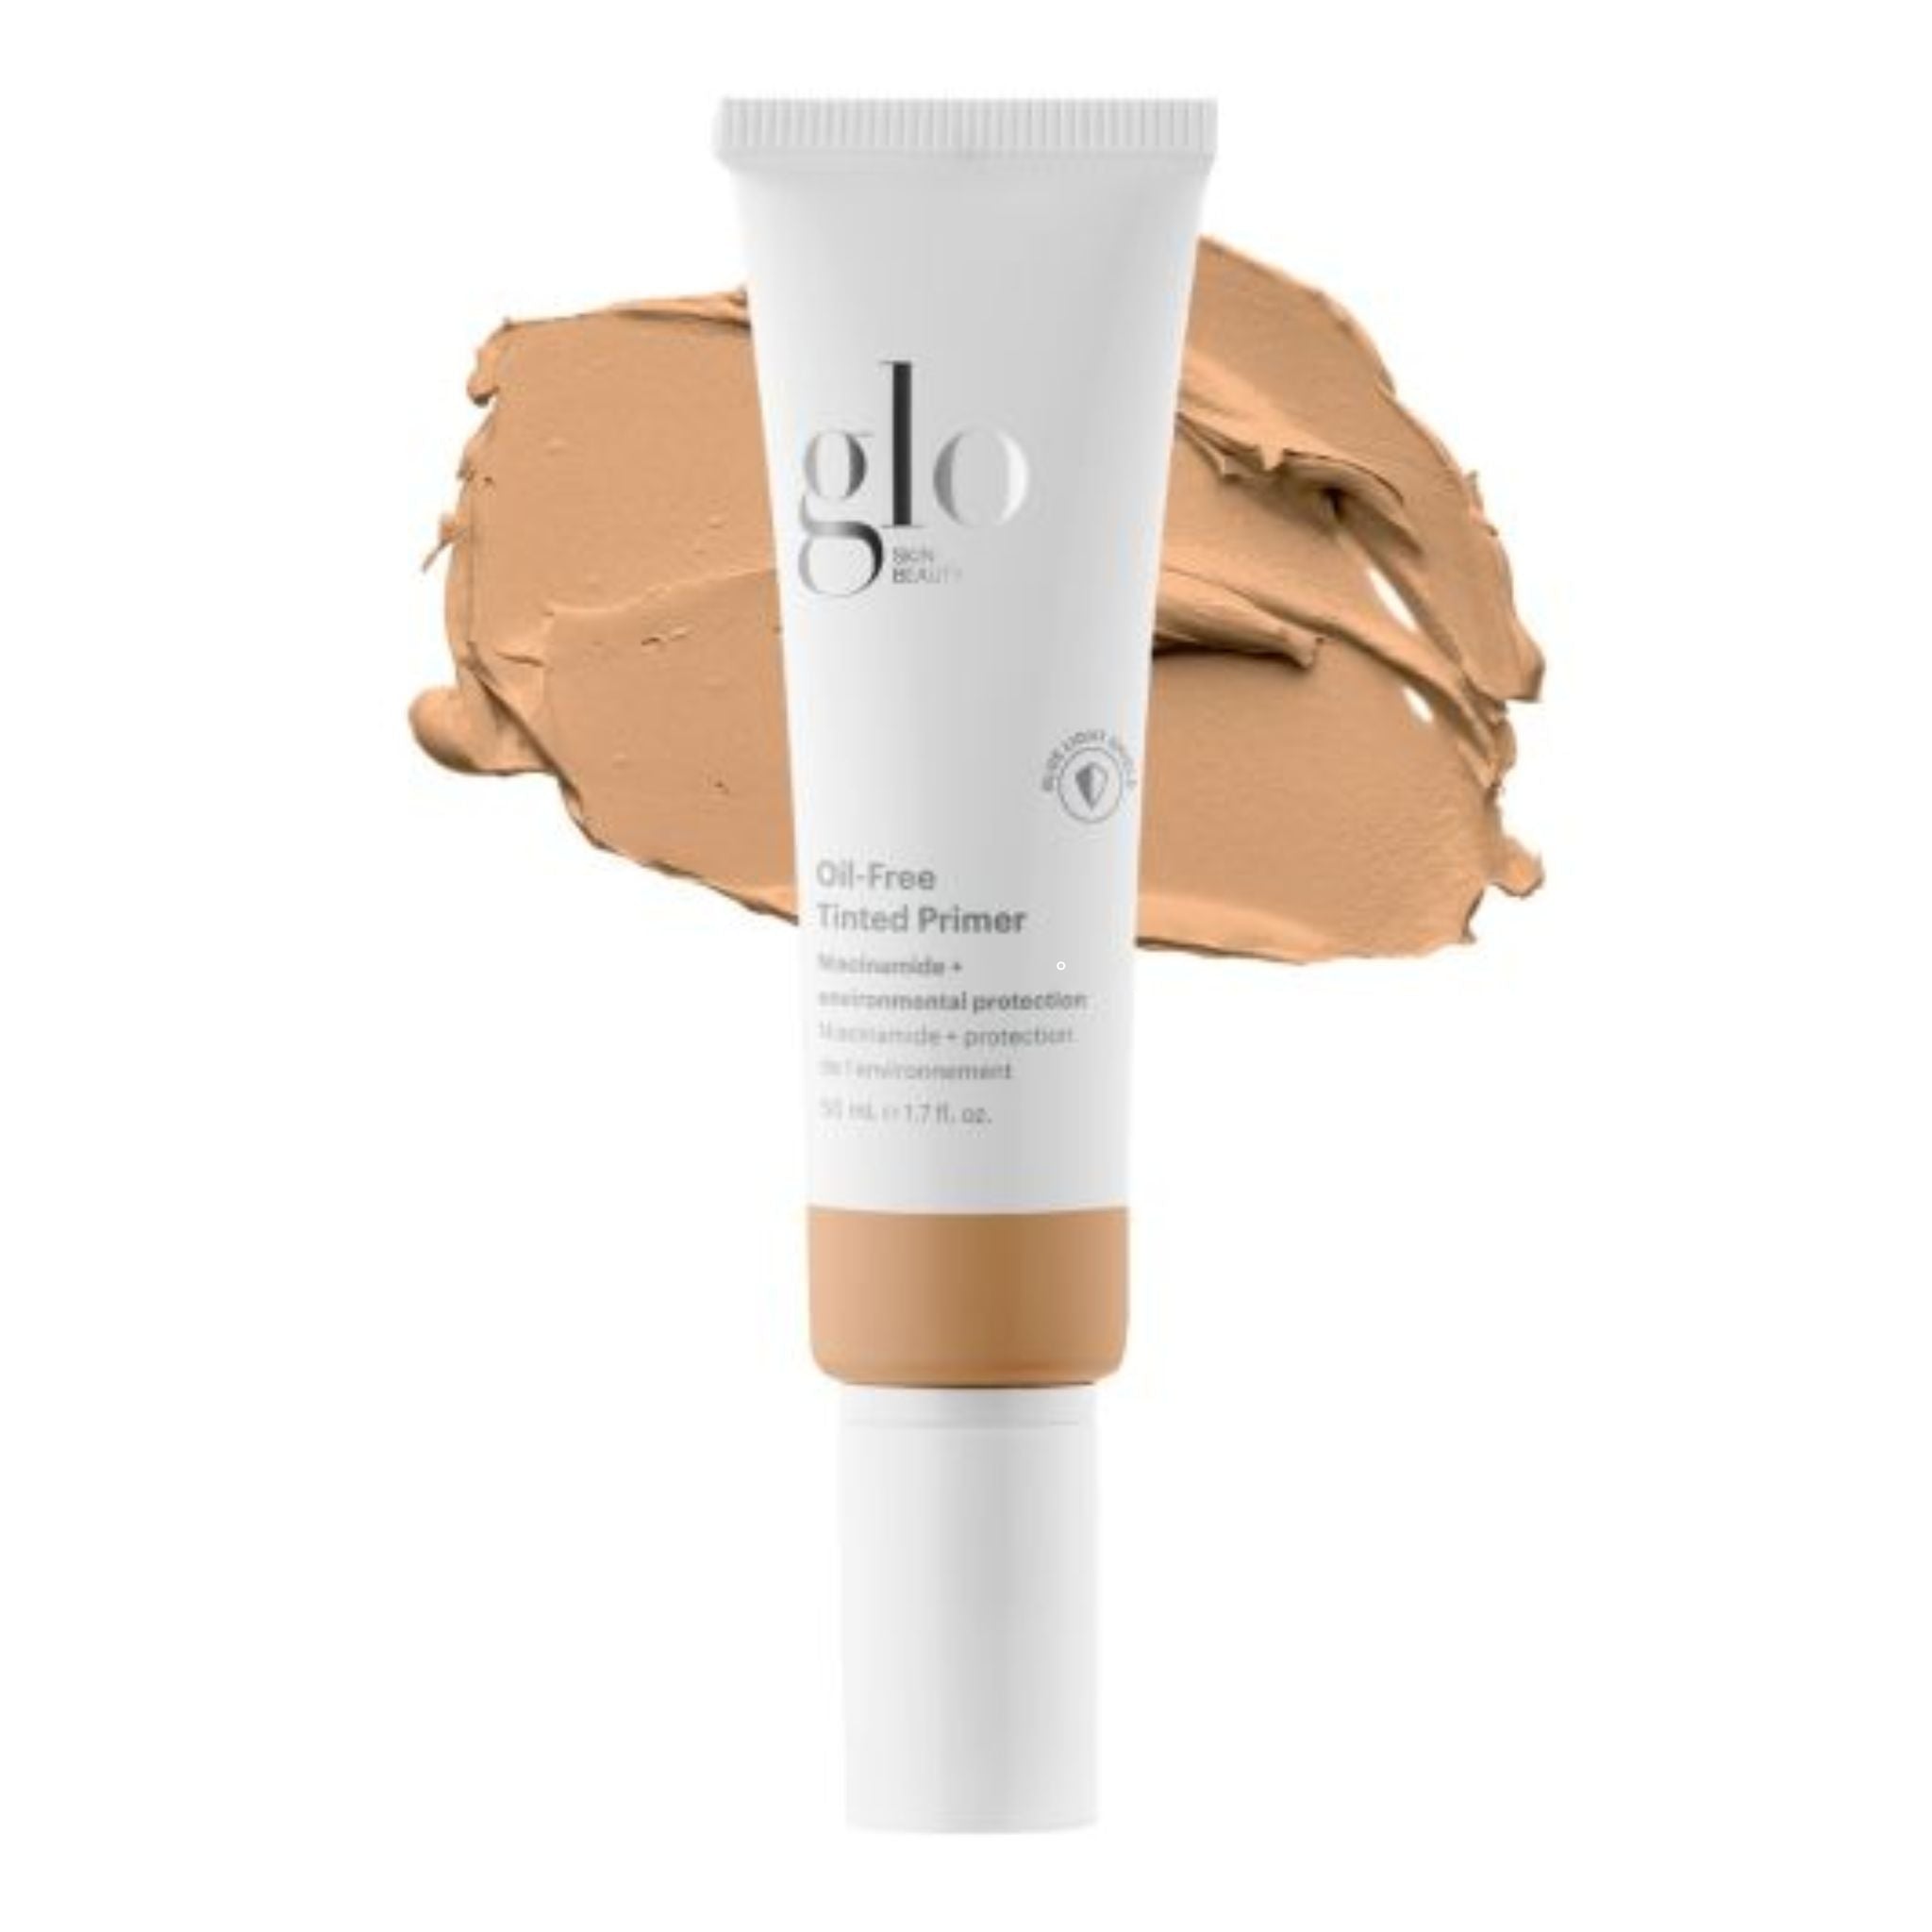 Glo Skin Beauty - Oil Free Tinted Primer